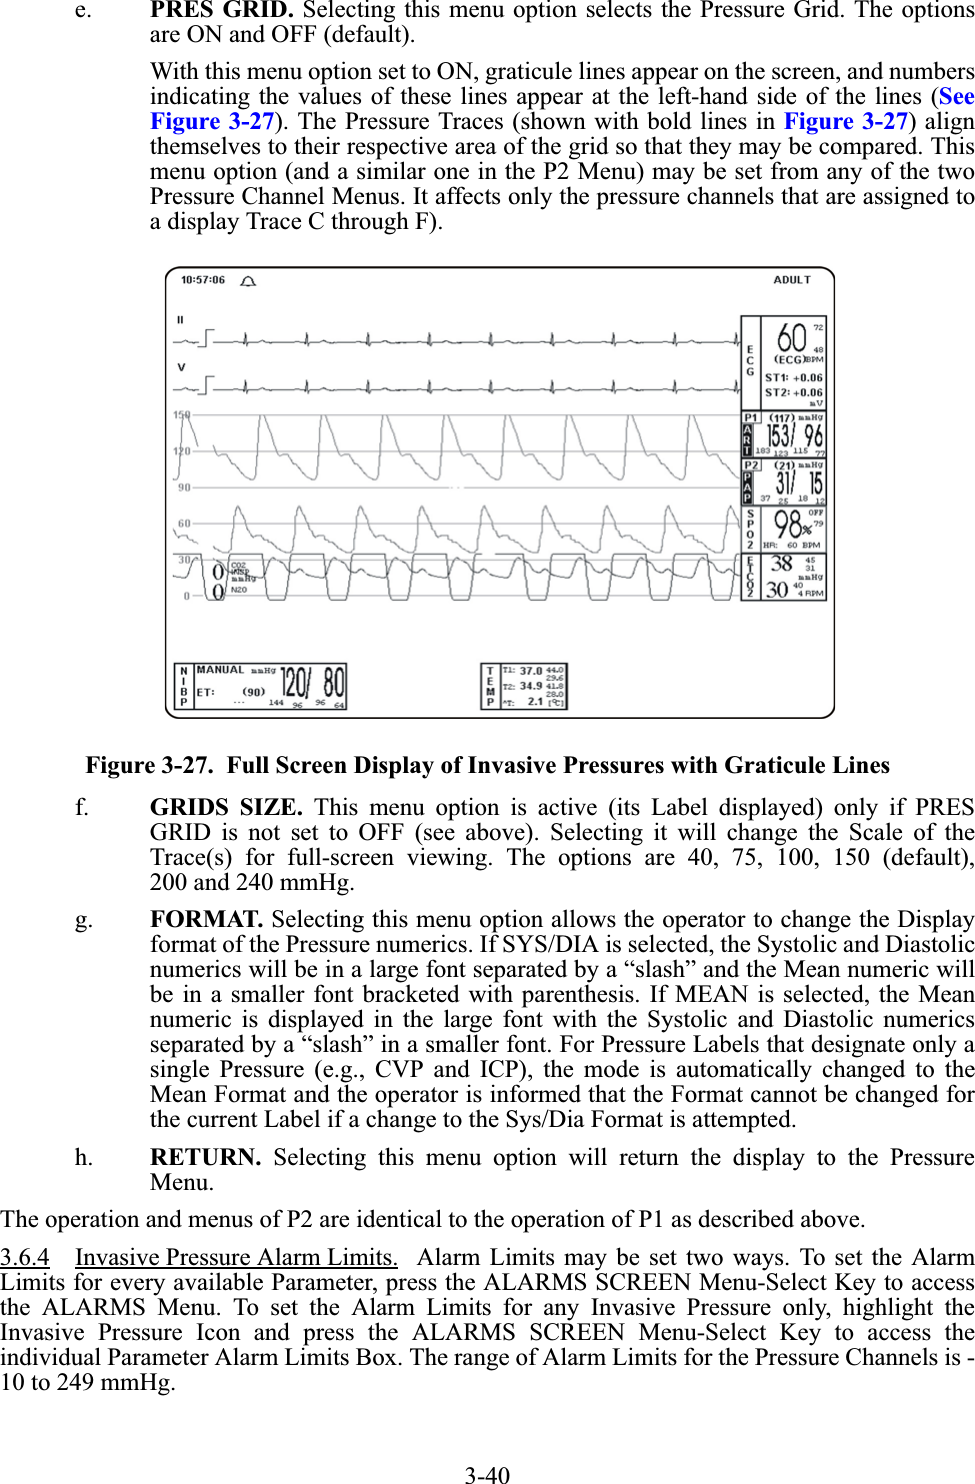 3-40e. PRES GRID. Selecting this menu option selects the Pressure Grid. The optionsare ON and OFF (default).With this menu option set to ON, graticule lines appear on the screen, and numbersindicating the values of these lines appear at the left-hand side of the lines (SeeFigure 3-27). The Pressure Traces (shown with bold lines in Figure 3-27) alignthemselves to their respective area of the grid so that they may be compared. Thismenu option (and a similar one in the P2 Menu) may be set from any of the twoPressure Channel Menus. It affects only the pressure channels that are assigned toa display Trace C through F).Figure 3-27.  Full Screen Display of Invasive Pressures with Graticule Linesf. GRIDS SIZE. This menu option is active (its Label displayed) only if PRESGRID is not set to OFF (see above). Selecting it will change the Scale of theTrace(s) for full-screen viewing. The options are 40, 75, 100, 150 (default),200 and 240 mmHg.g. FORMAT. Selecting this menu option allows the operator to change the Displayformat of the Pressure numerics. If SYS/DIA is selected, the Systolic and Diastolicnumerics will be in a large font separated by a “slash” and the Mean numeric willbe in a smaller font bracketed with parenthesis. If MEAN is selected, the Meannumeric is displayed in the large font with the Systolic and Diastolic numericsseparated by a “slash” in a smaller font. For Pressure Labels that designate only asingle Pressure (e.g., CVP and ICP), the mode is automatically changed to theMean Format and the operator is informed that the Format cannot be changed forthe current Label if a change to the Sys/Dia Format is attempted.h. RETURN. Selecting this menu option will return the display to the PressureMenu.The operation and menus of P2 are identical to the operation of P1 as described above.3.6.4 Invasive Pressure Alarm Limits.  Alarm Limits may be set two ways. To set the AlarmLimits for every available Parameter, press the ALARMS SCREEN Menu-Select Key to accessthe ALARMS Menu. To set the Alarm Limits for any Invasive Pressure only, highlight theInvasive Pressure Icon and press the ALARMS SCREEN Menu-Select Key to access theindividual Parameter Alarm Limits Box. The range of Alarm Limits for the Pressure Channels is -10 to 249 mmHg.